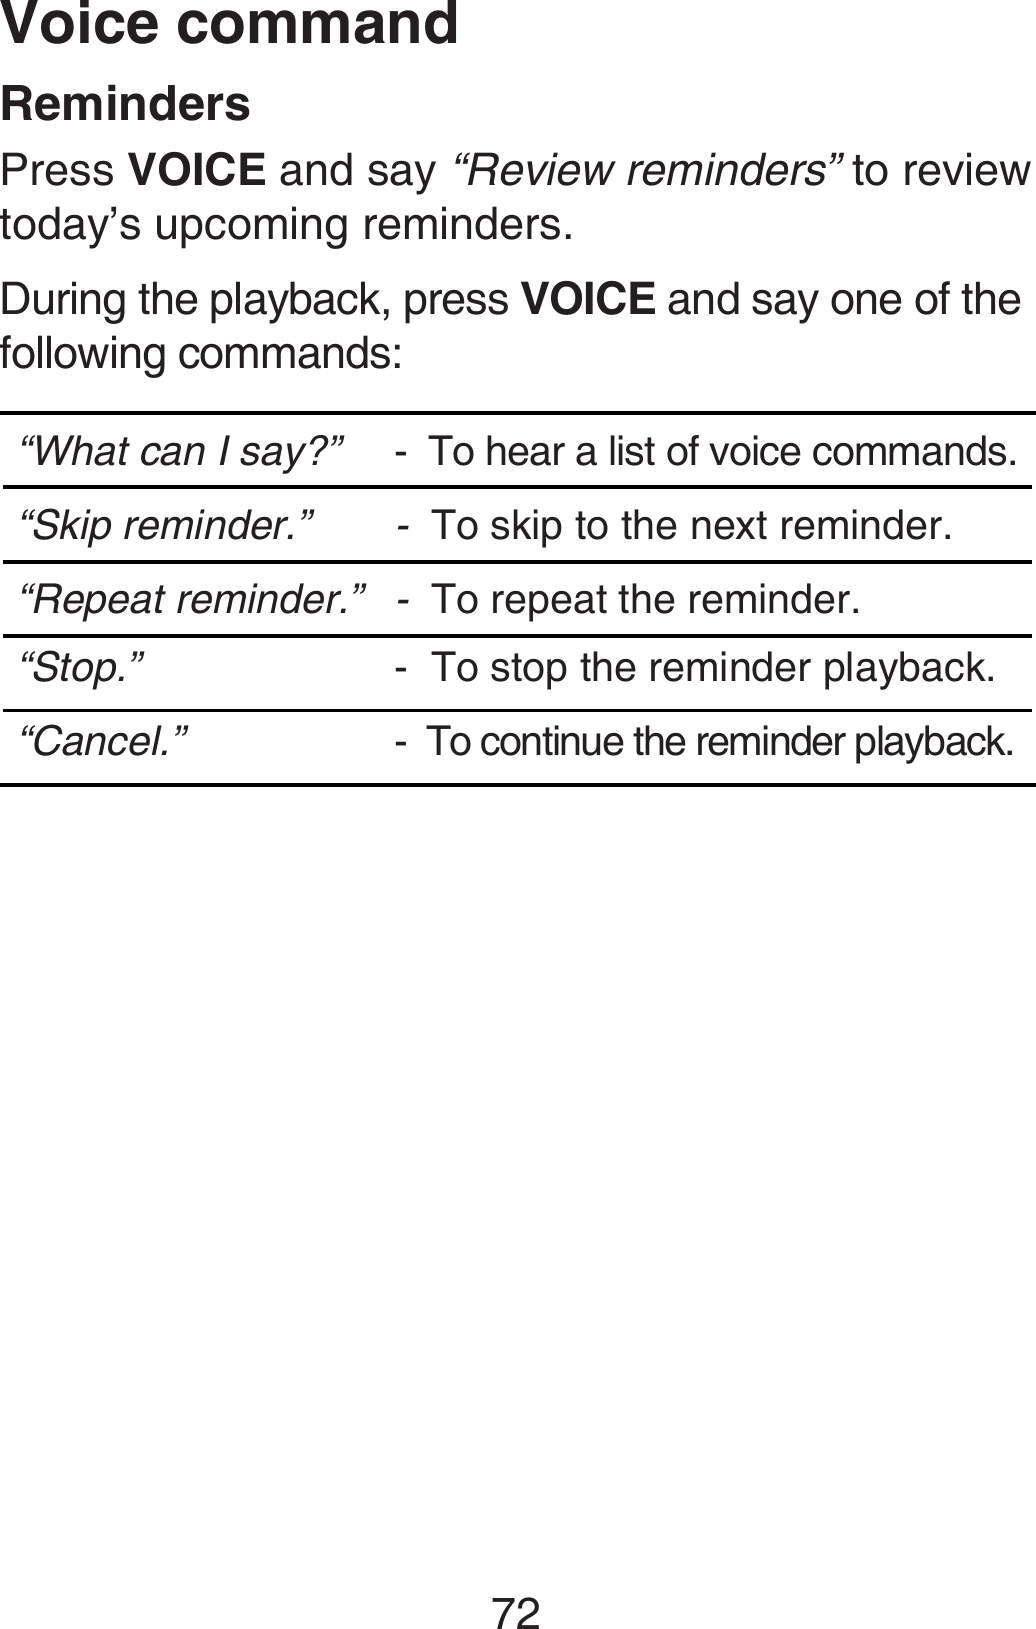 72Voice commandRemindersPress VOICE and say “Review reminders” to review today’s upcoming reminders.During the playback, press VOICE and say one of the following commands: “What can I say?” -  To hear a list of voice commands.“Skip reminder.” -  To skip to the next reminder.“Repeat reminder.” -  To repeat the reminder.“Stop.” -  To stop the reminder playback.“Cancel.” -  To continue the reminder playback.